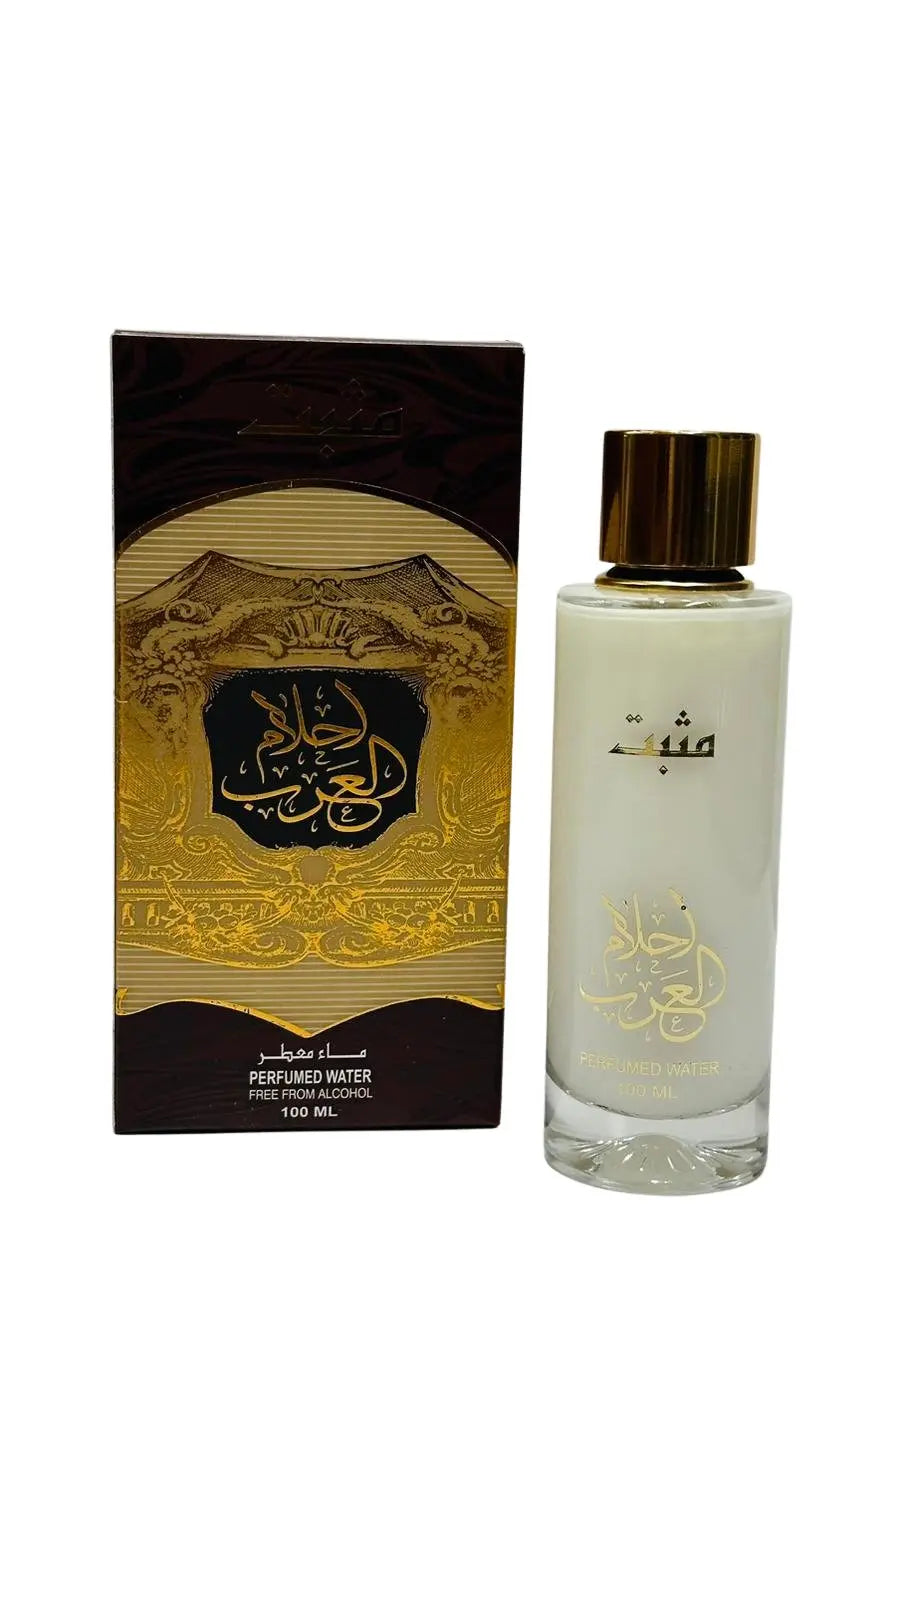 A product image featuring a bottle of perfumed water next to its packaging. The bottle is clear with a frosted finish and gold lettering, alongside a shiny gold cap. It holds 100 ml of liquid. The box has a luxurious design with gold and black colors, Arabic calligraphy, and the phrase "PERFUMED WATER FREE FROM ALCOHOL" in English at the bottom.